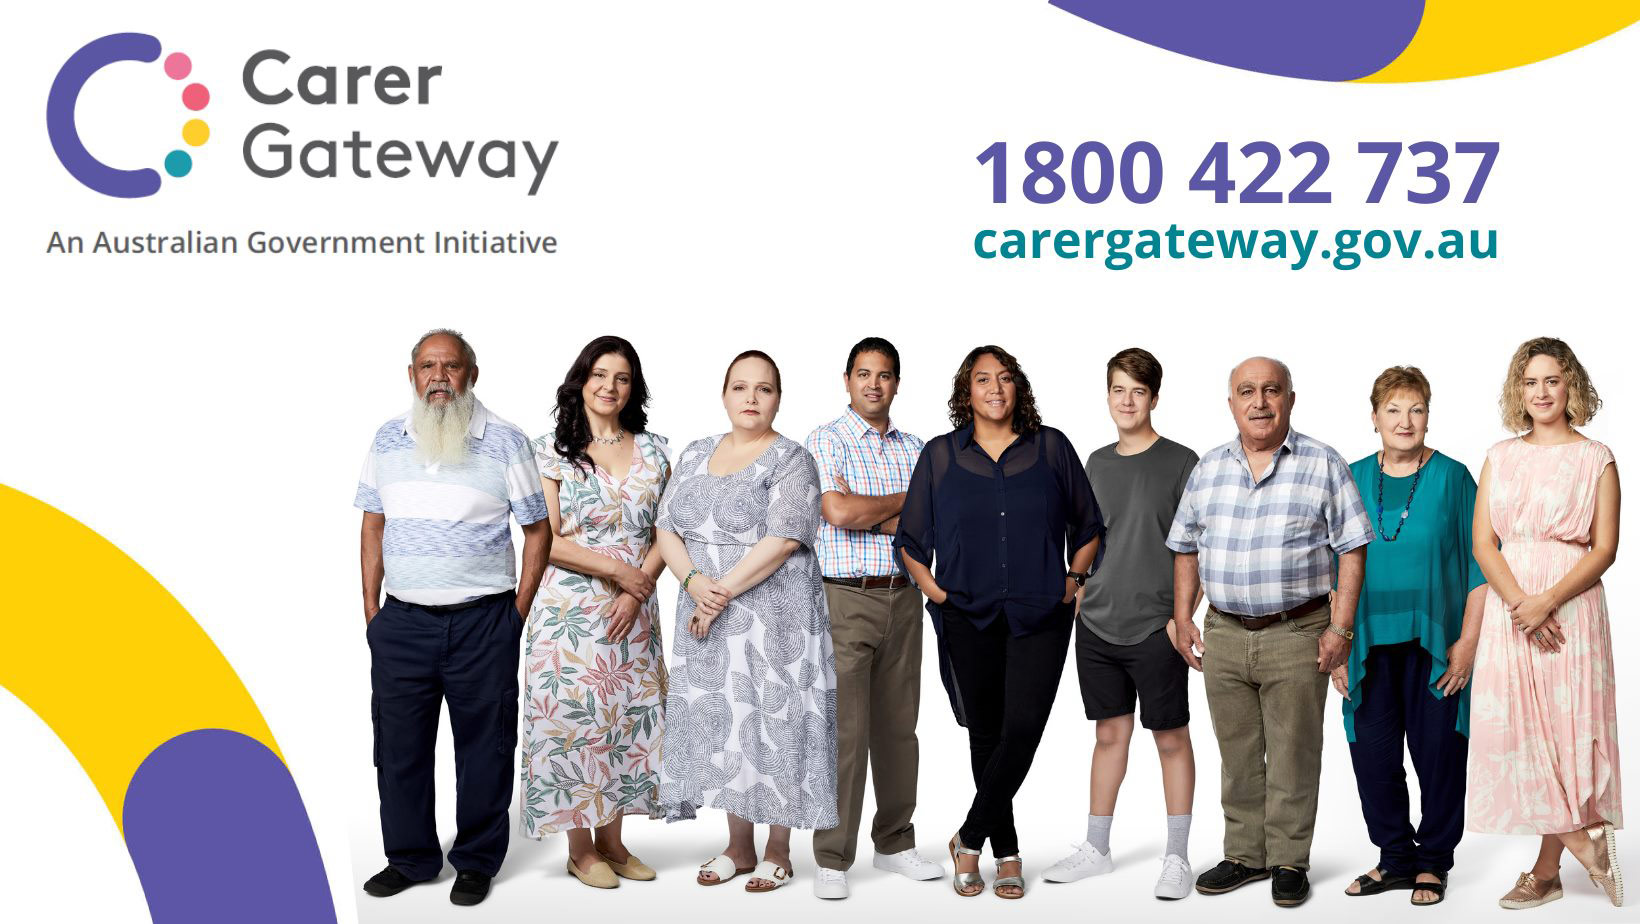 The Carer Gateway Contact information